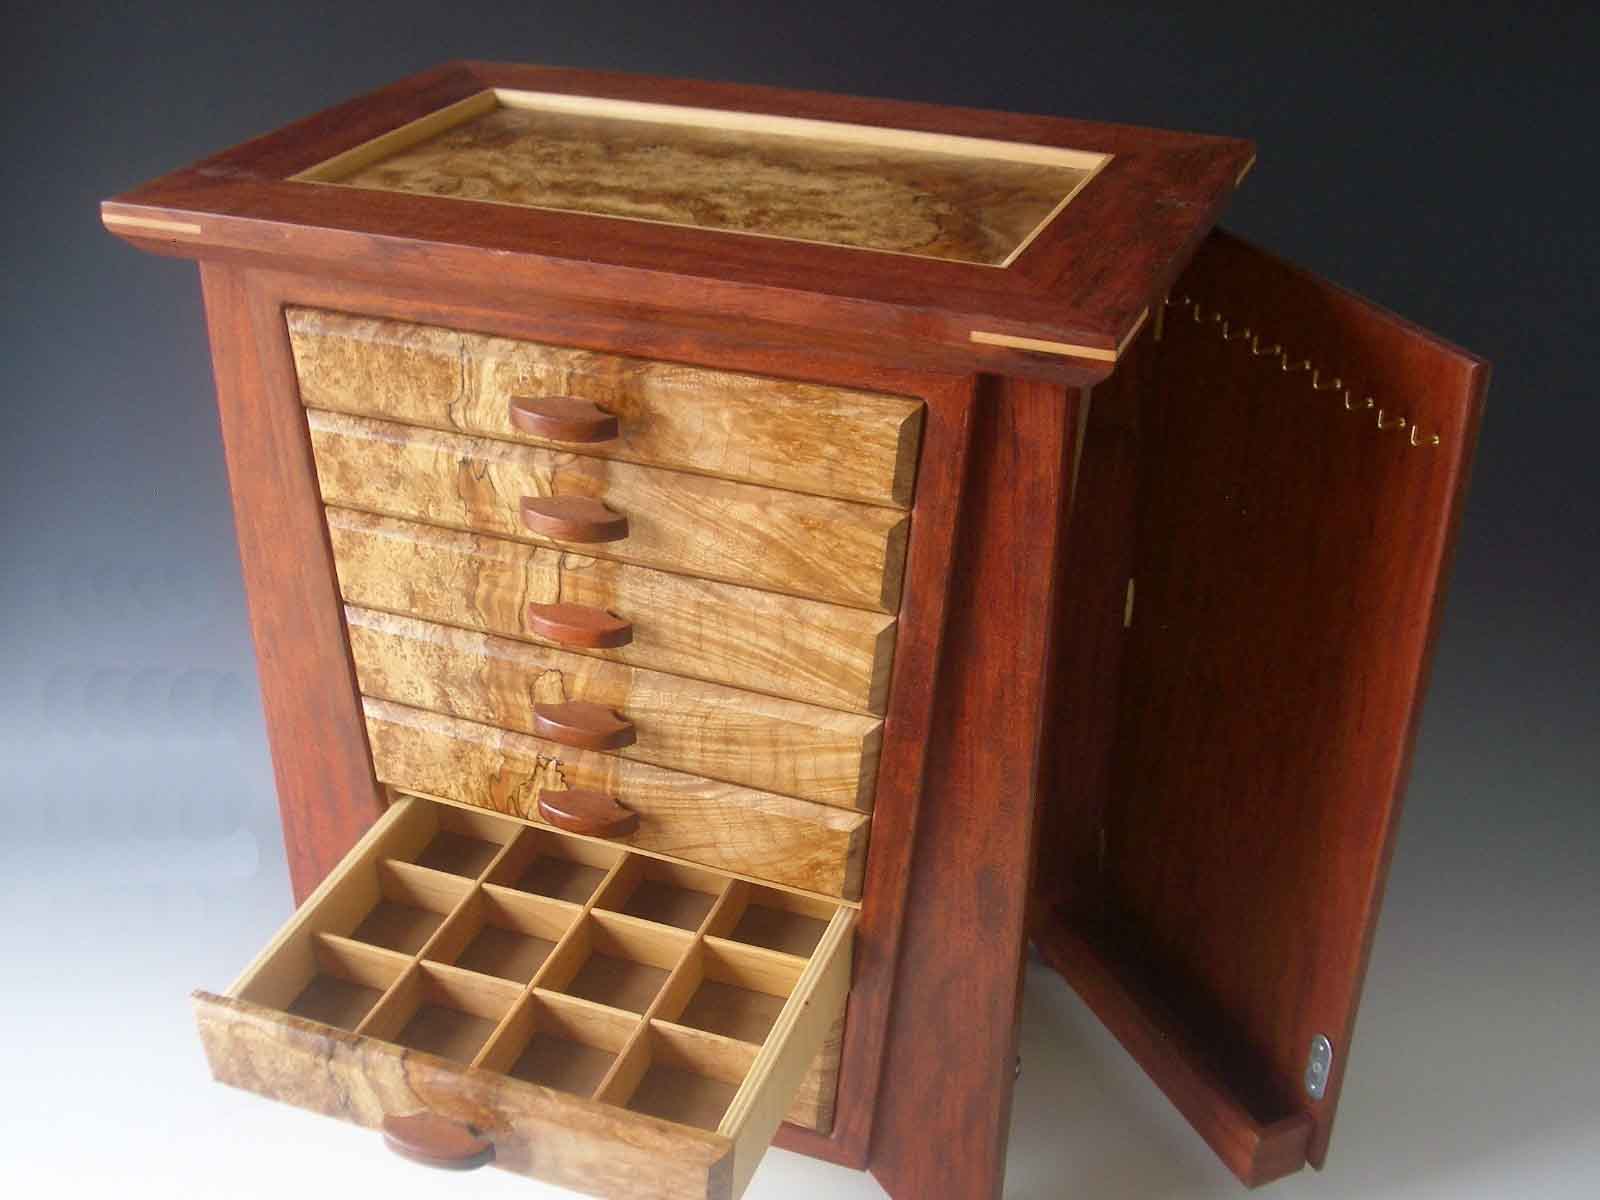 Handmade Jewelry Boxes: Unique Gifts for Women